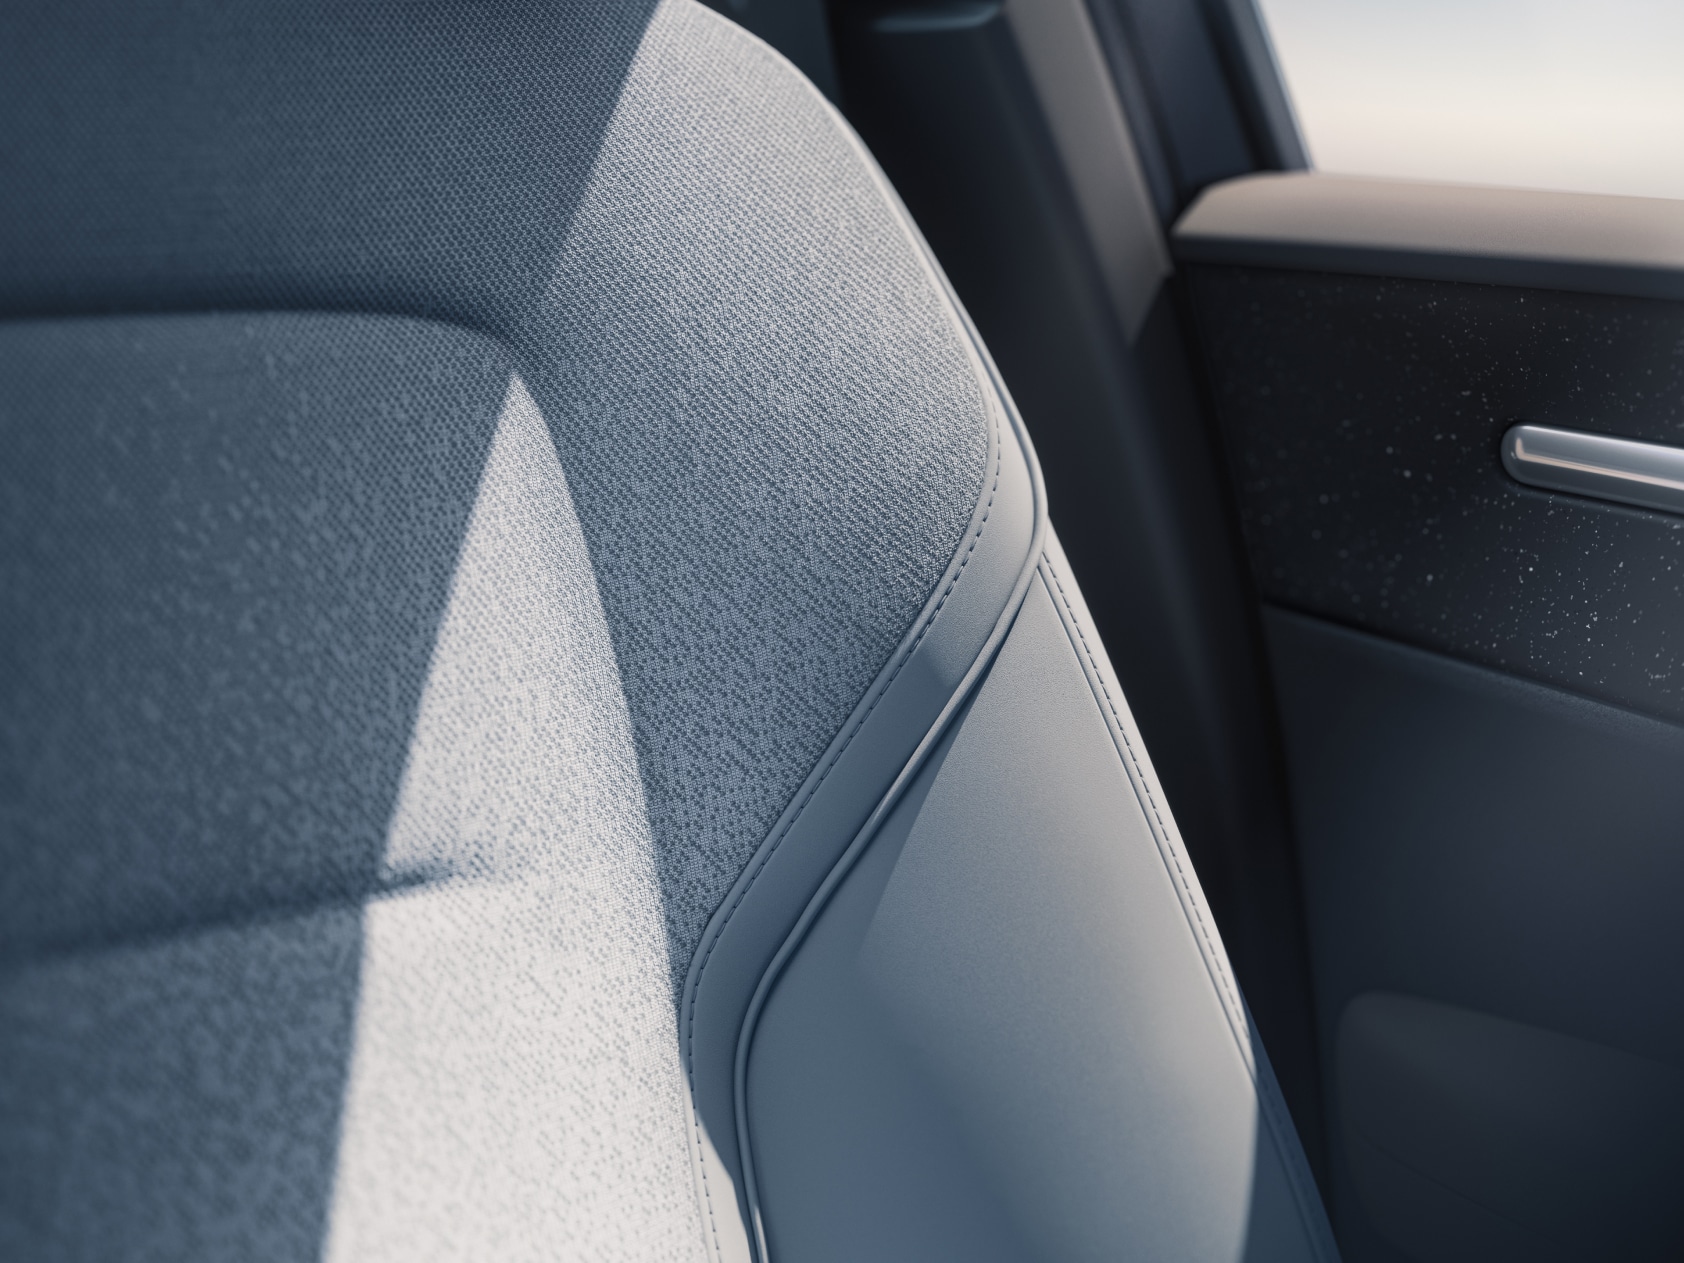 Detailed image of the EX30's front seat upholstery in an interior room design theme called Breeze.